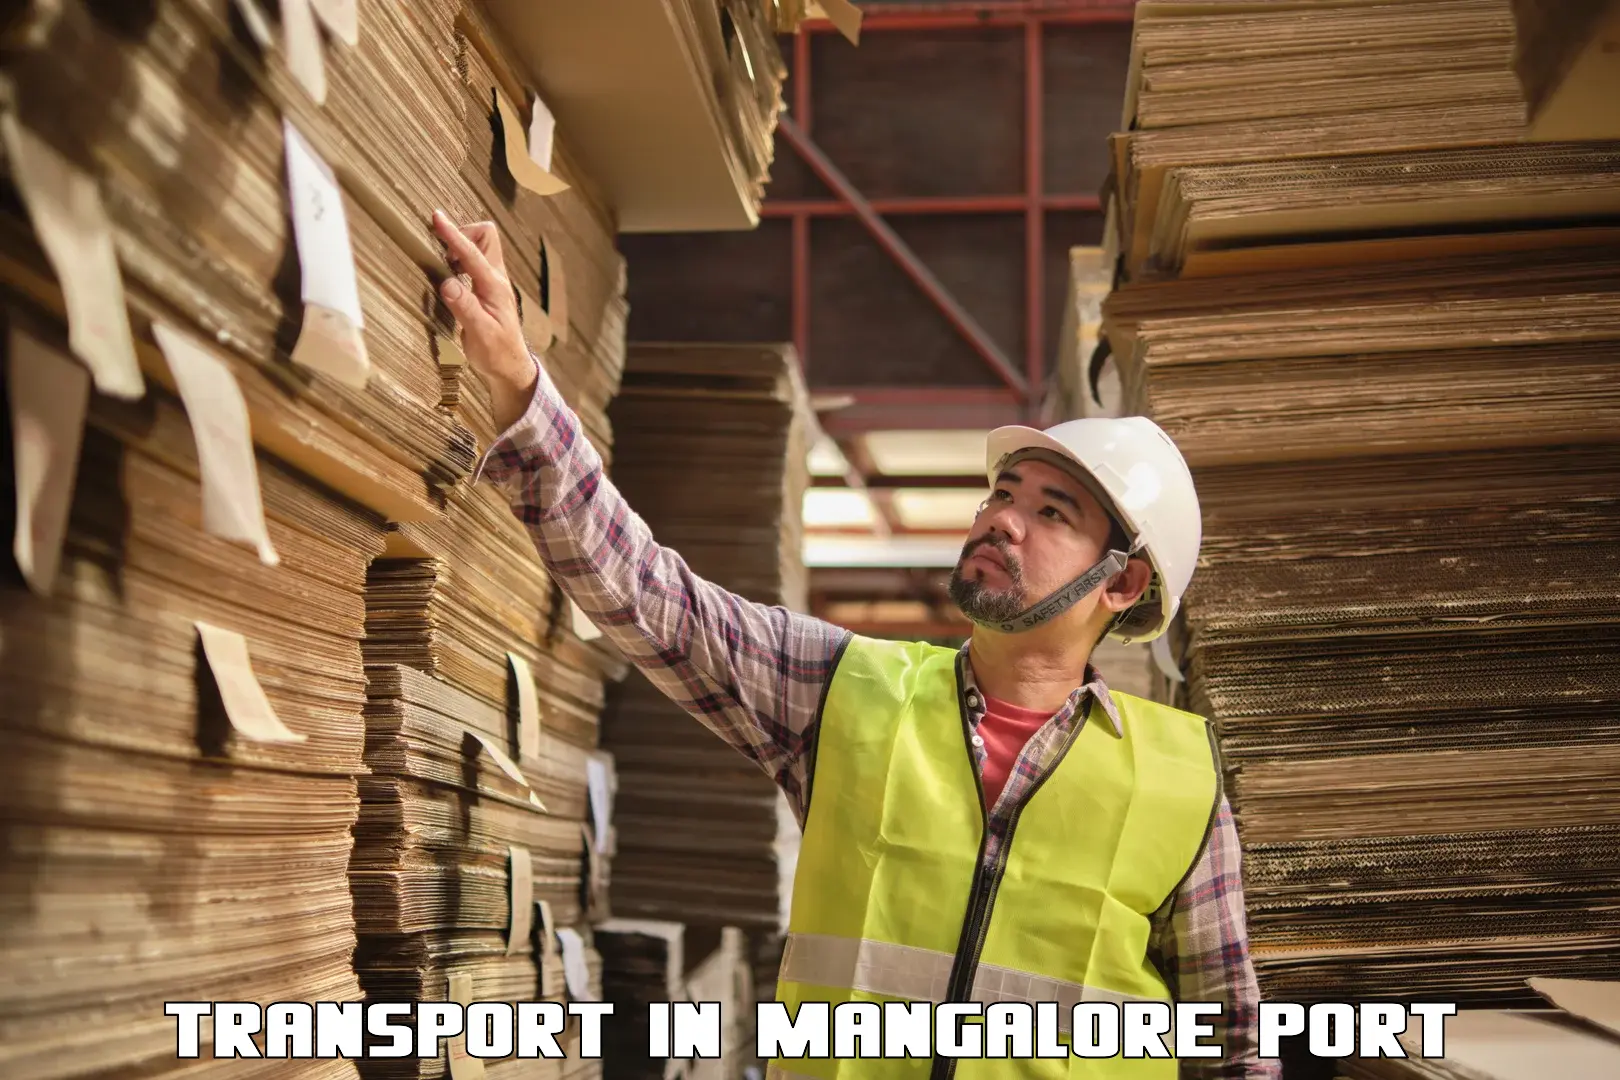 Interstate transport services in Mangalore Port